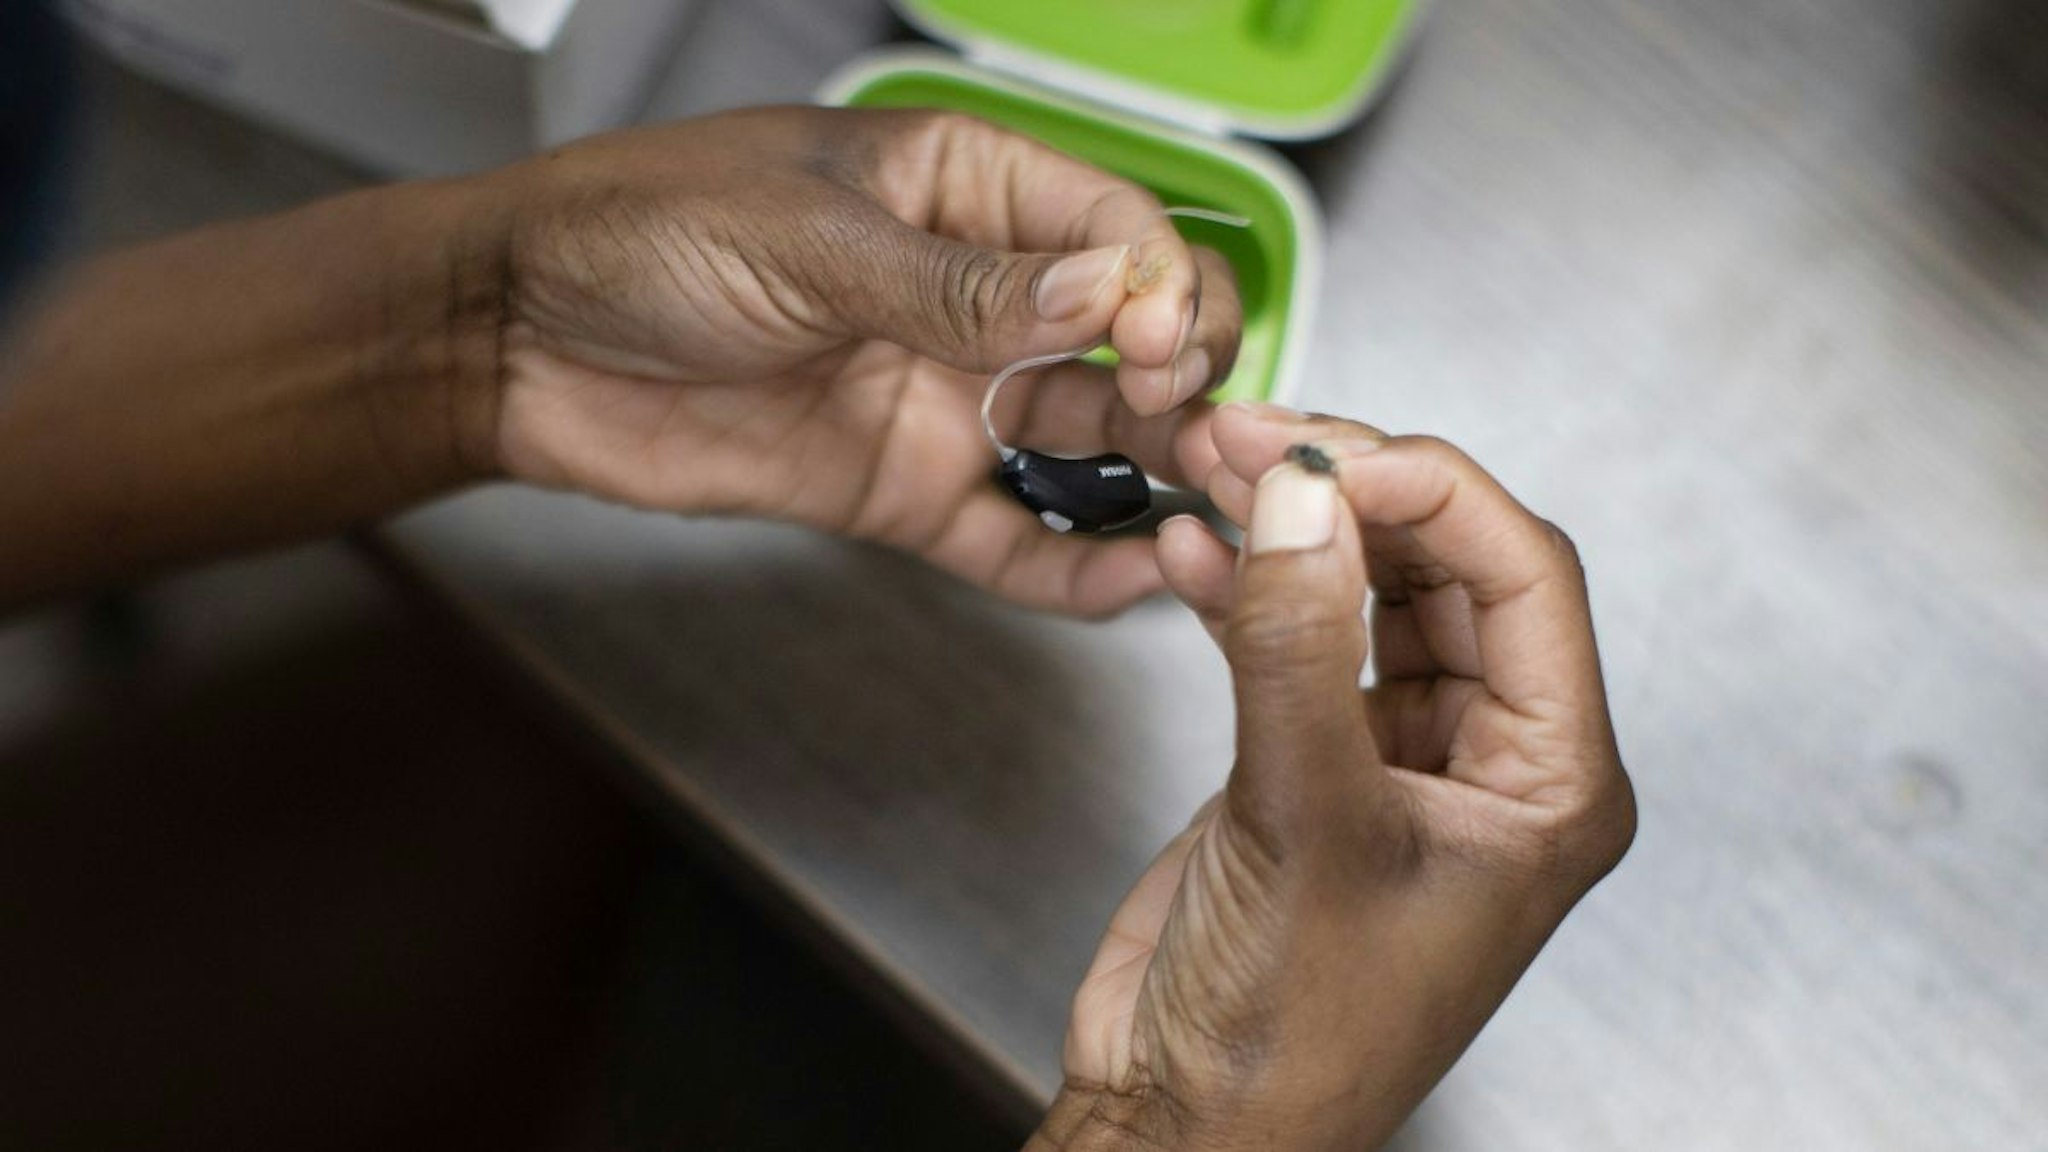 A patient holds her hearing aid as she visits Hear Again America for a checkup on October 20, 2021 in Fort Lauderdale, Florida.